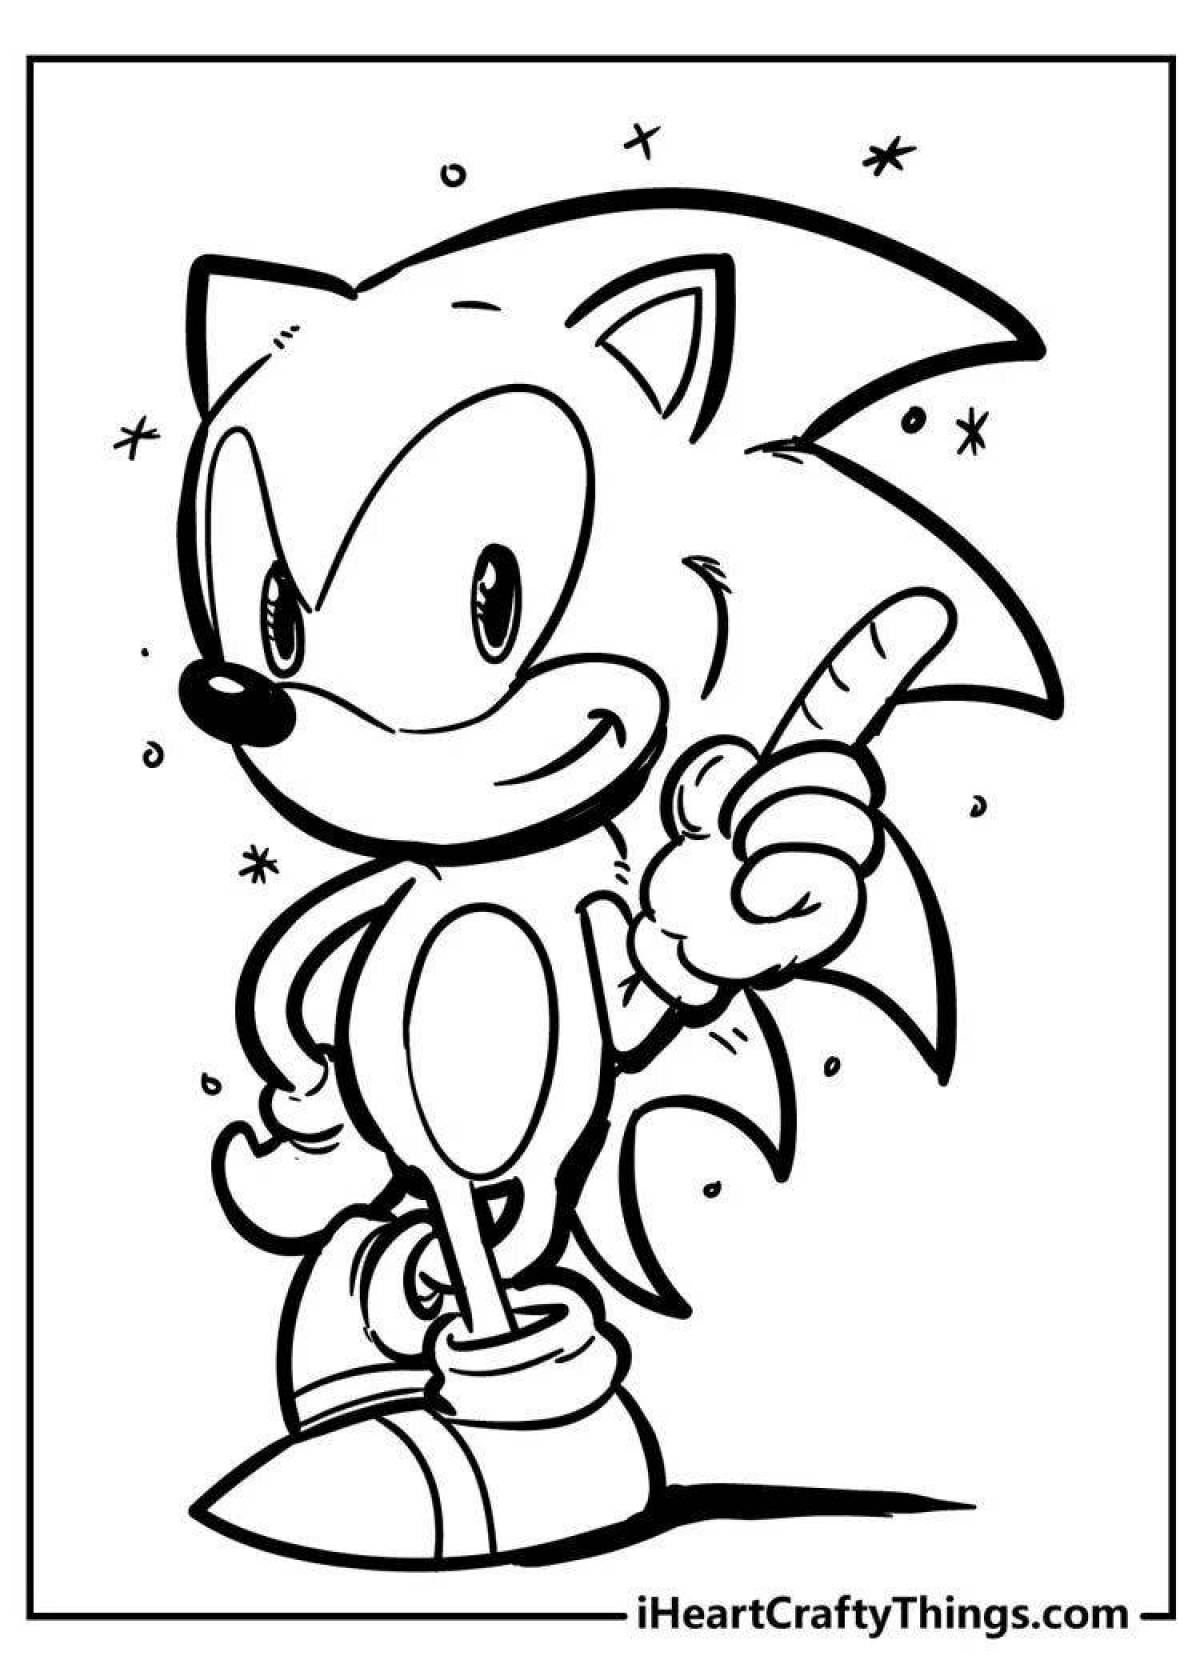 Animated sonic classic coloring book